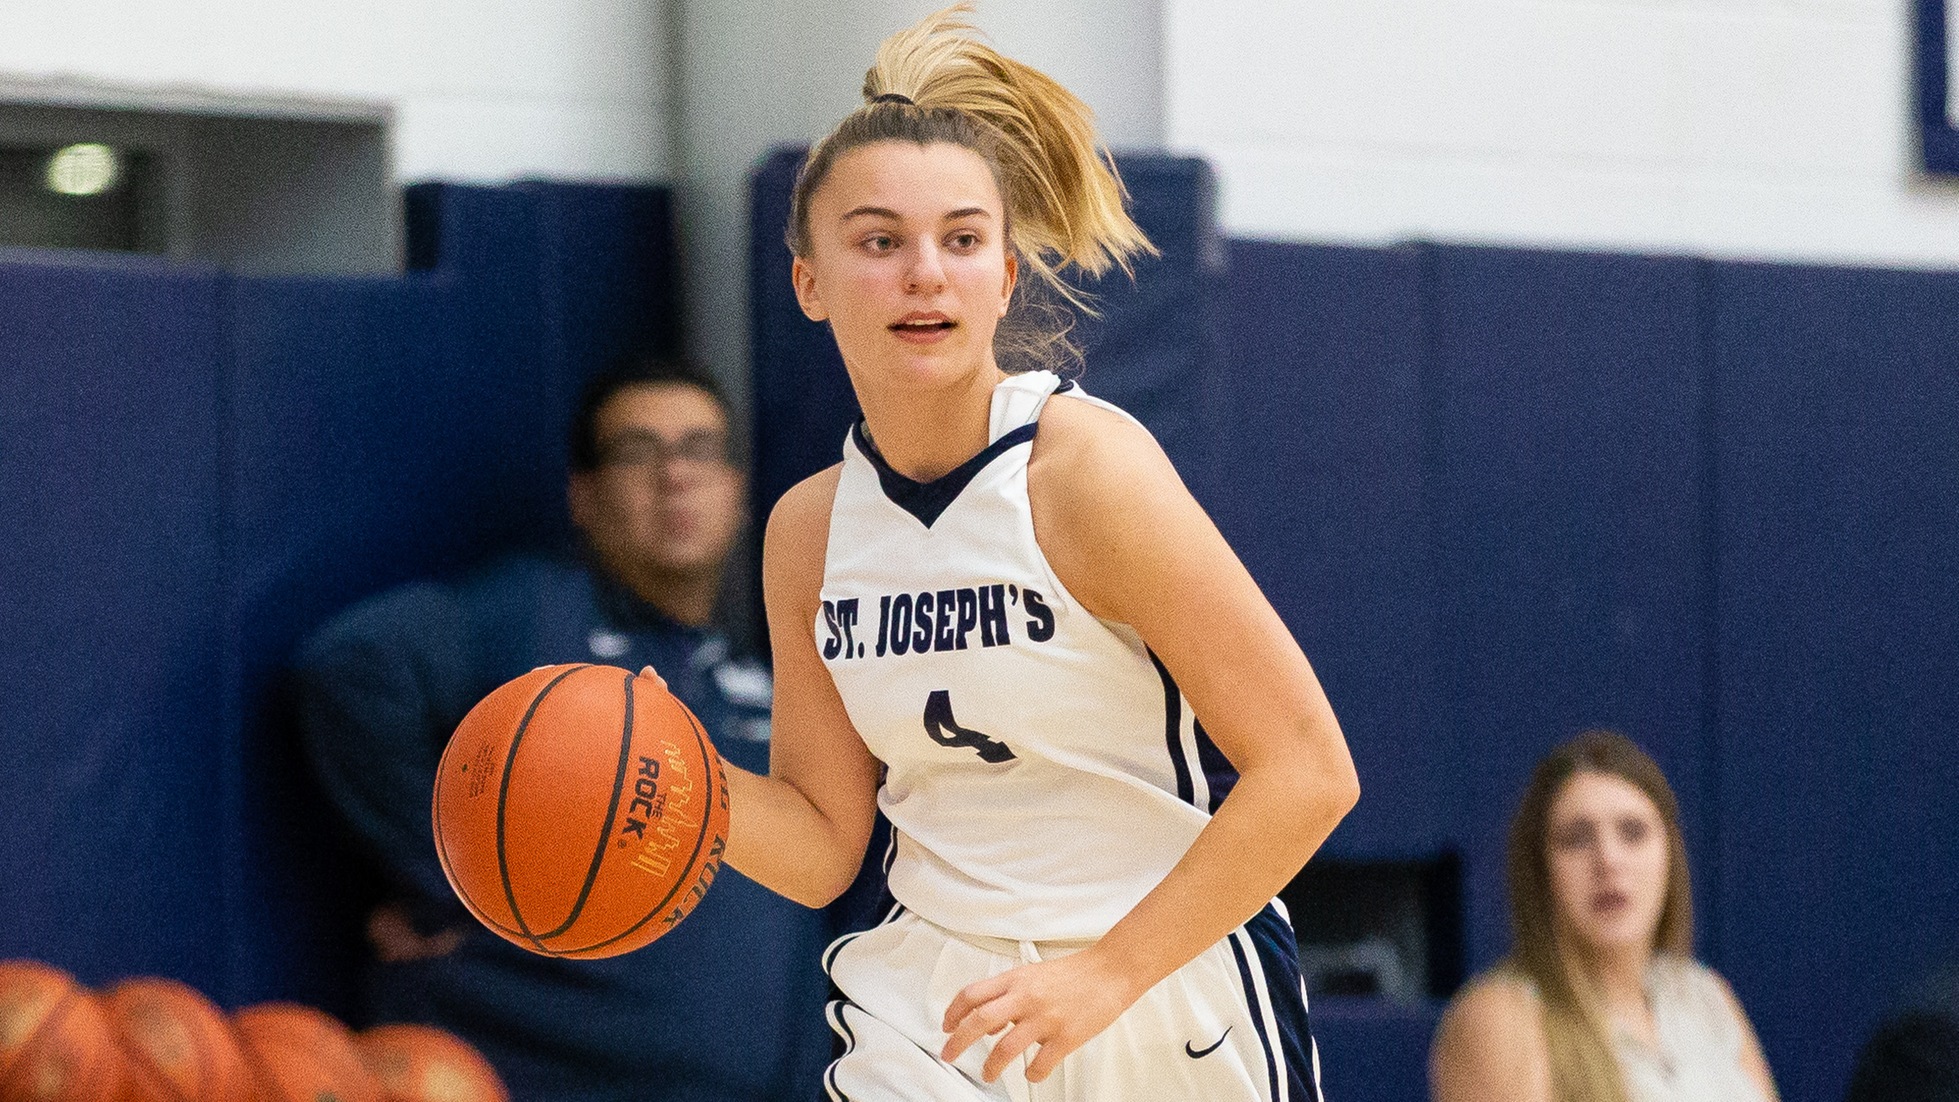 O'Donnell and Porcasi Combine for 48; Women's Basketball Runs Away from Purchase